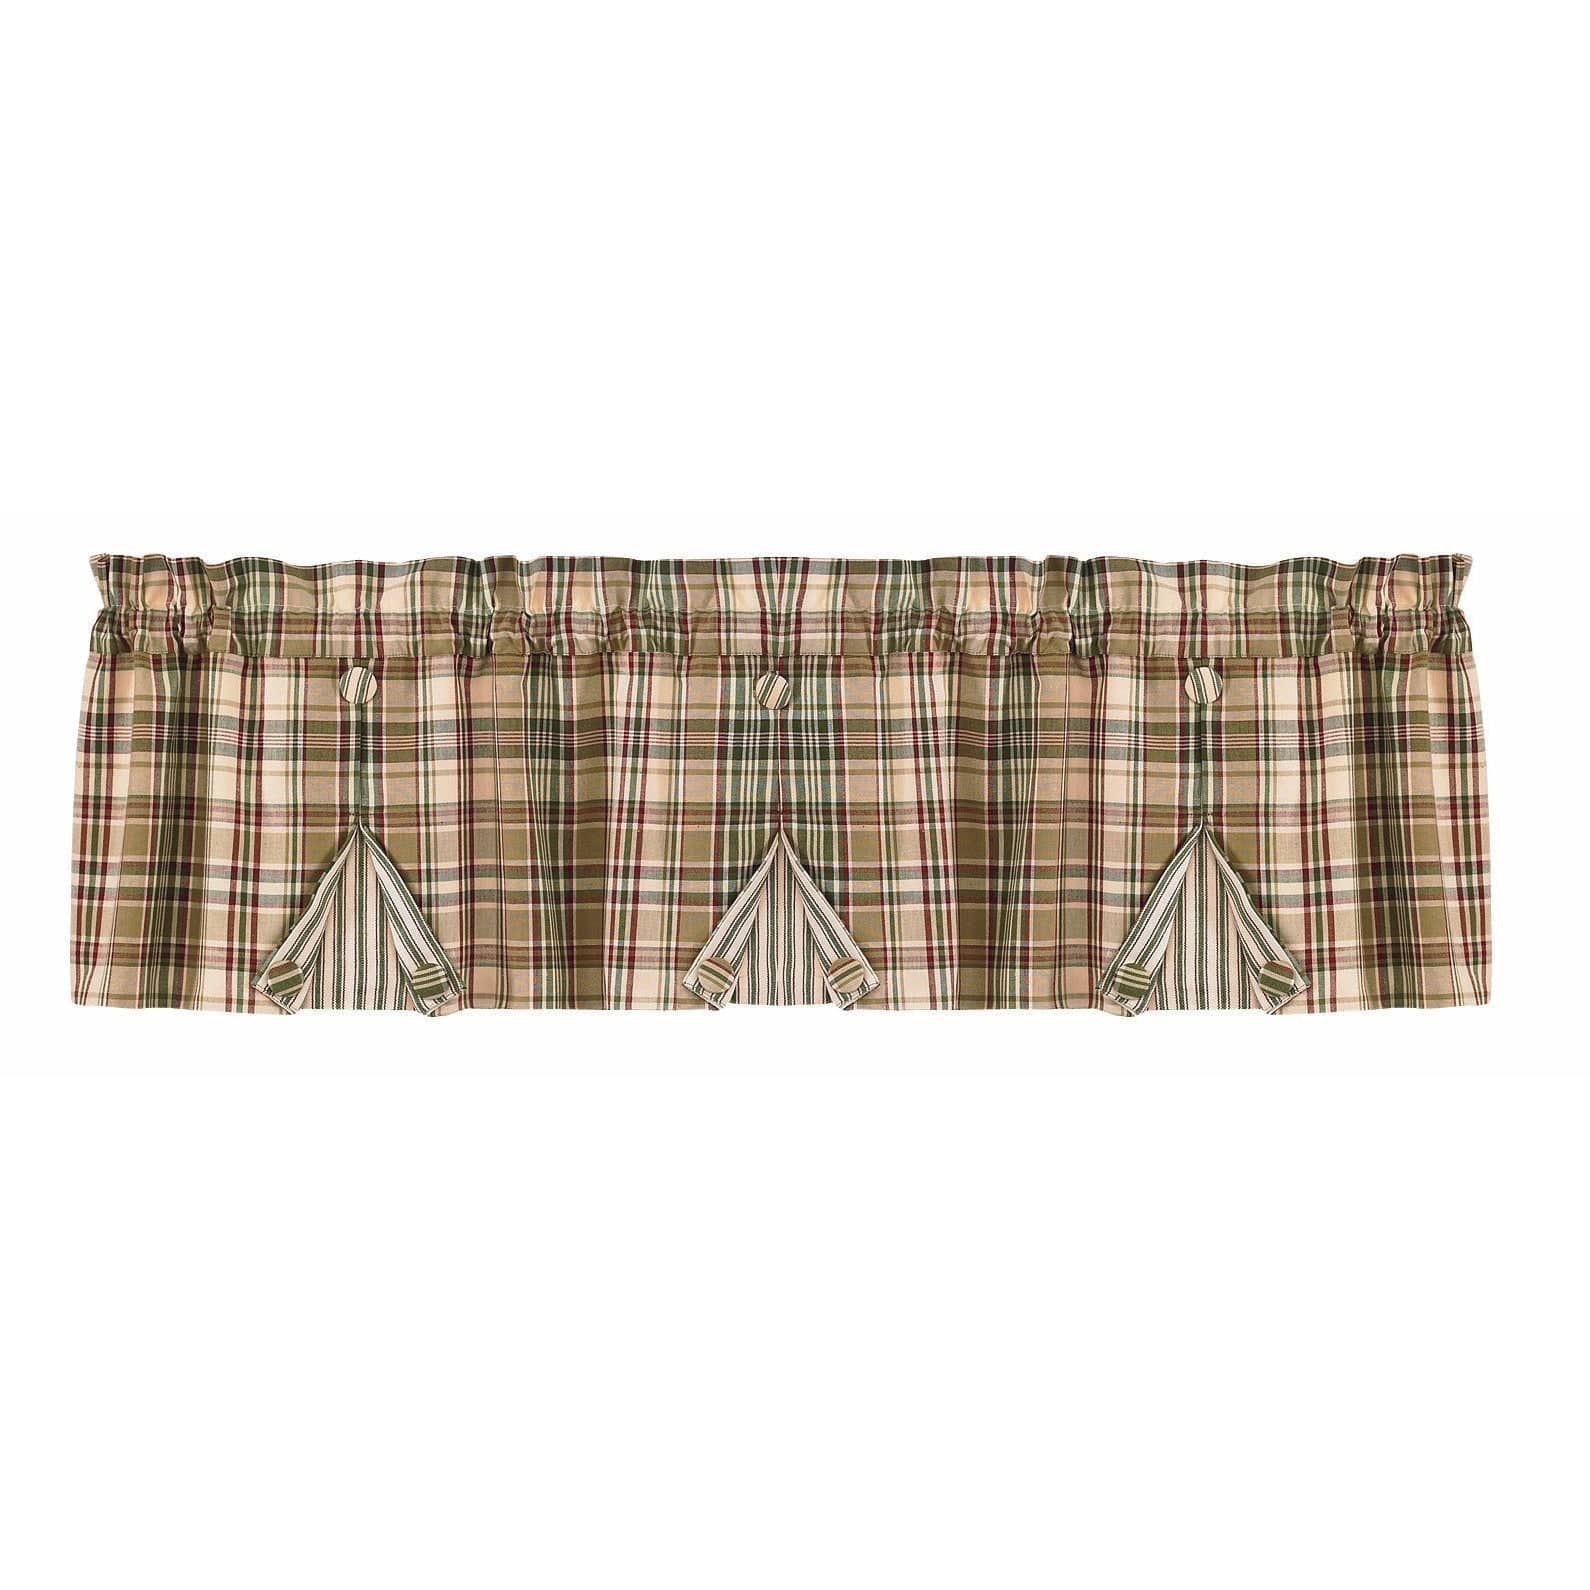 Thyme Pleated Valance Lined-Park Designs-The Village Merchant